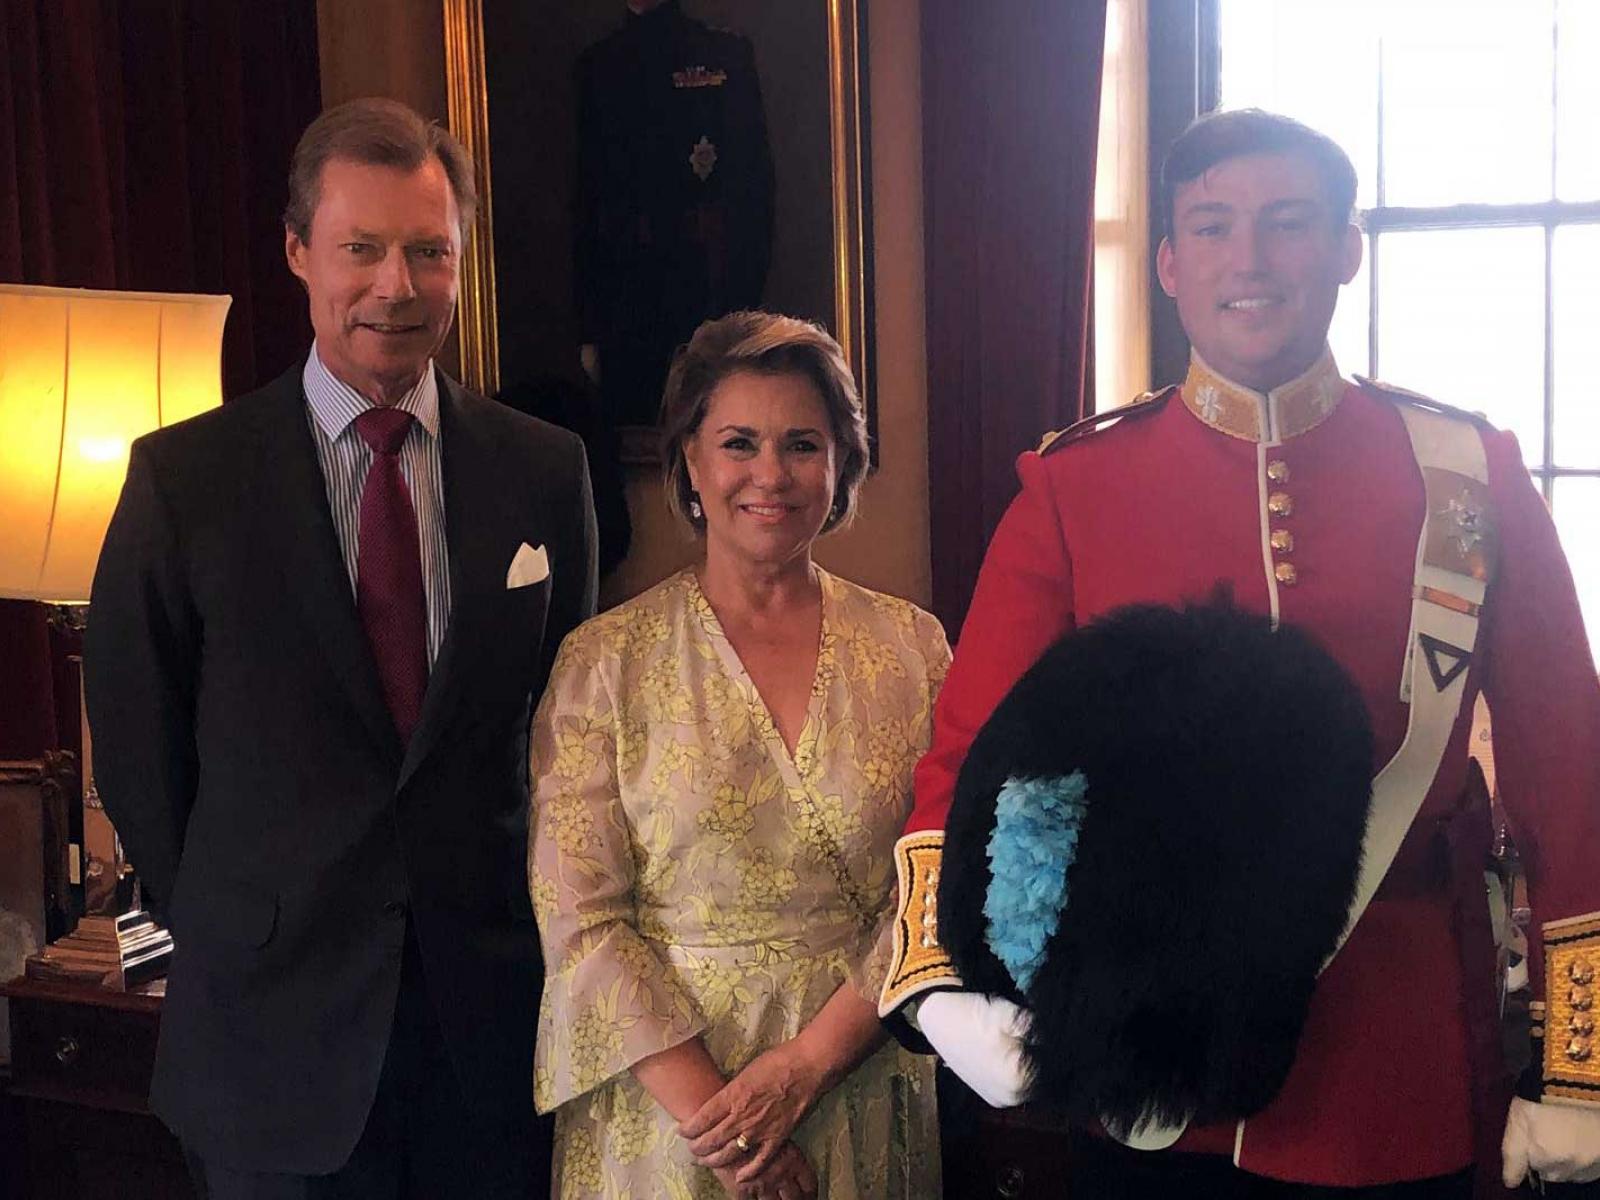 The grand ducal couple and Prince Sébastien